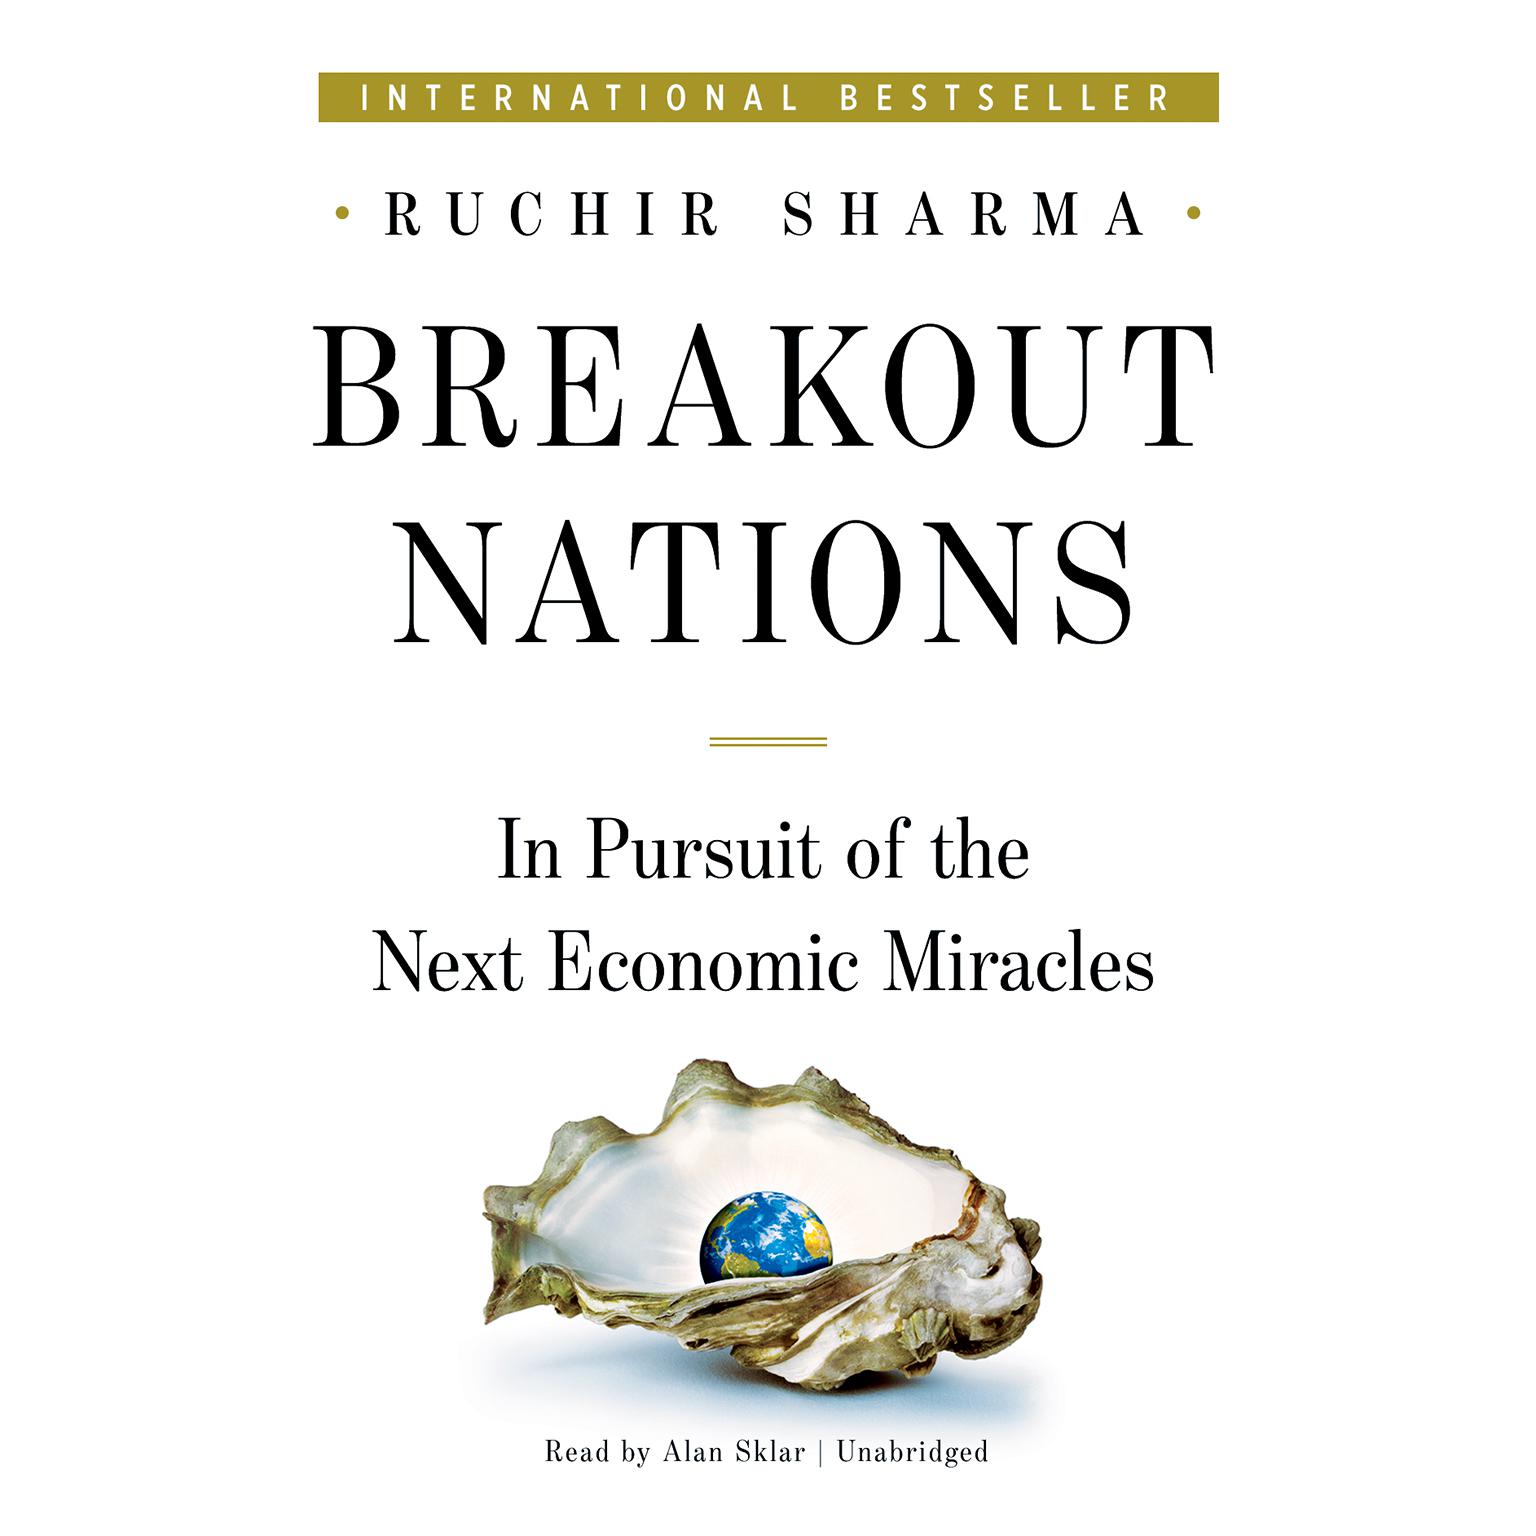 Breakout Nations: In Pursuit of the Next Economic Miracles Audiobook, by Ruchir Sharma